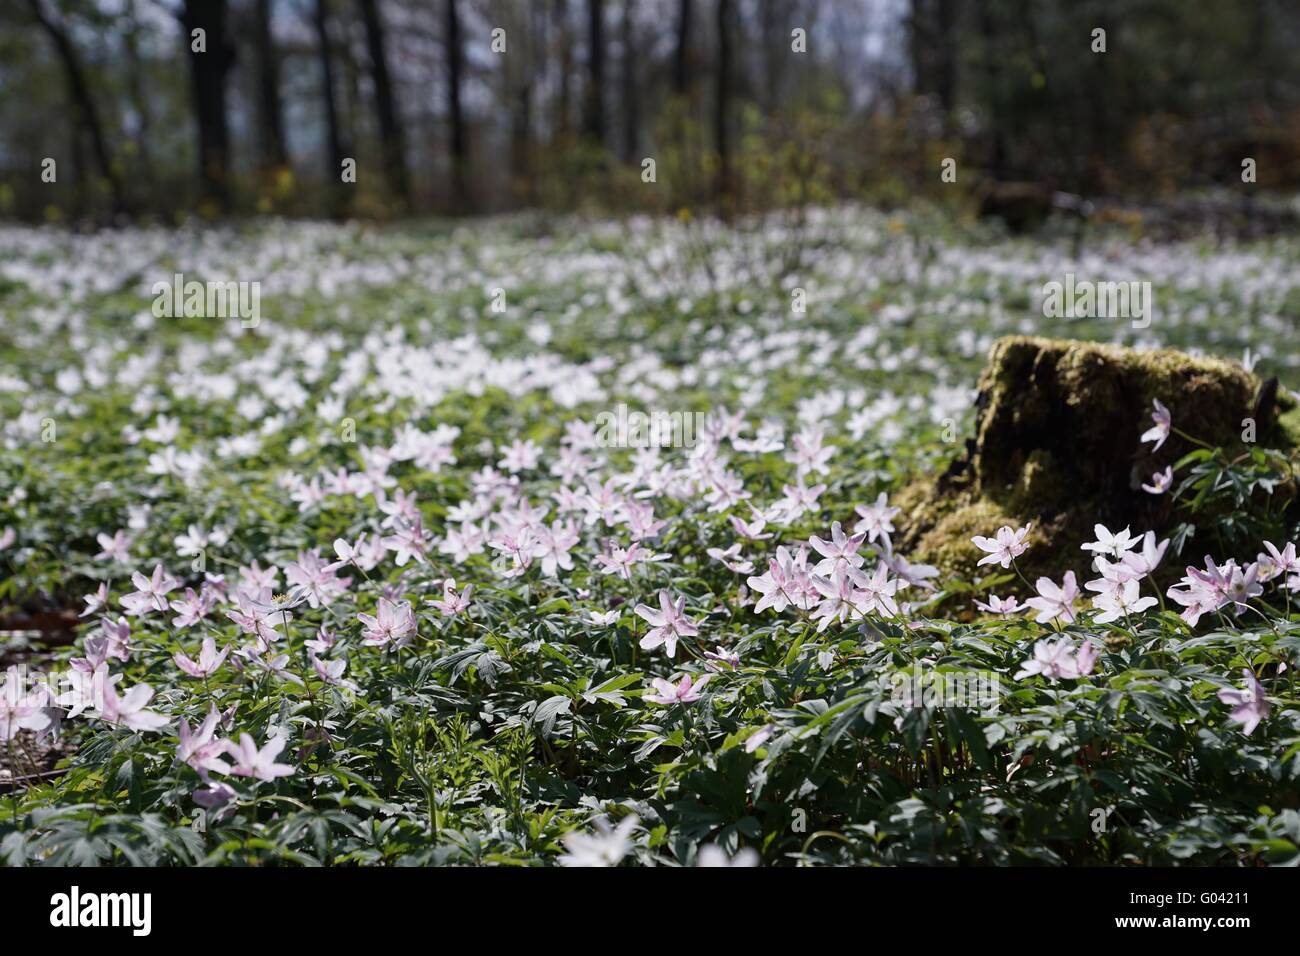 Anemone nemorosa with a tree stump in the forest Stock Photo